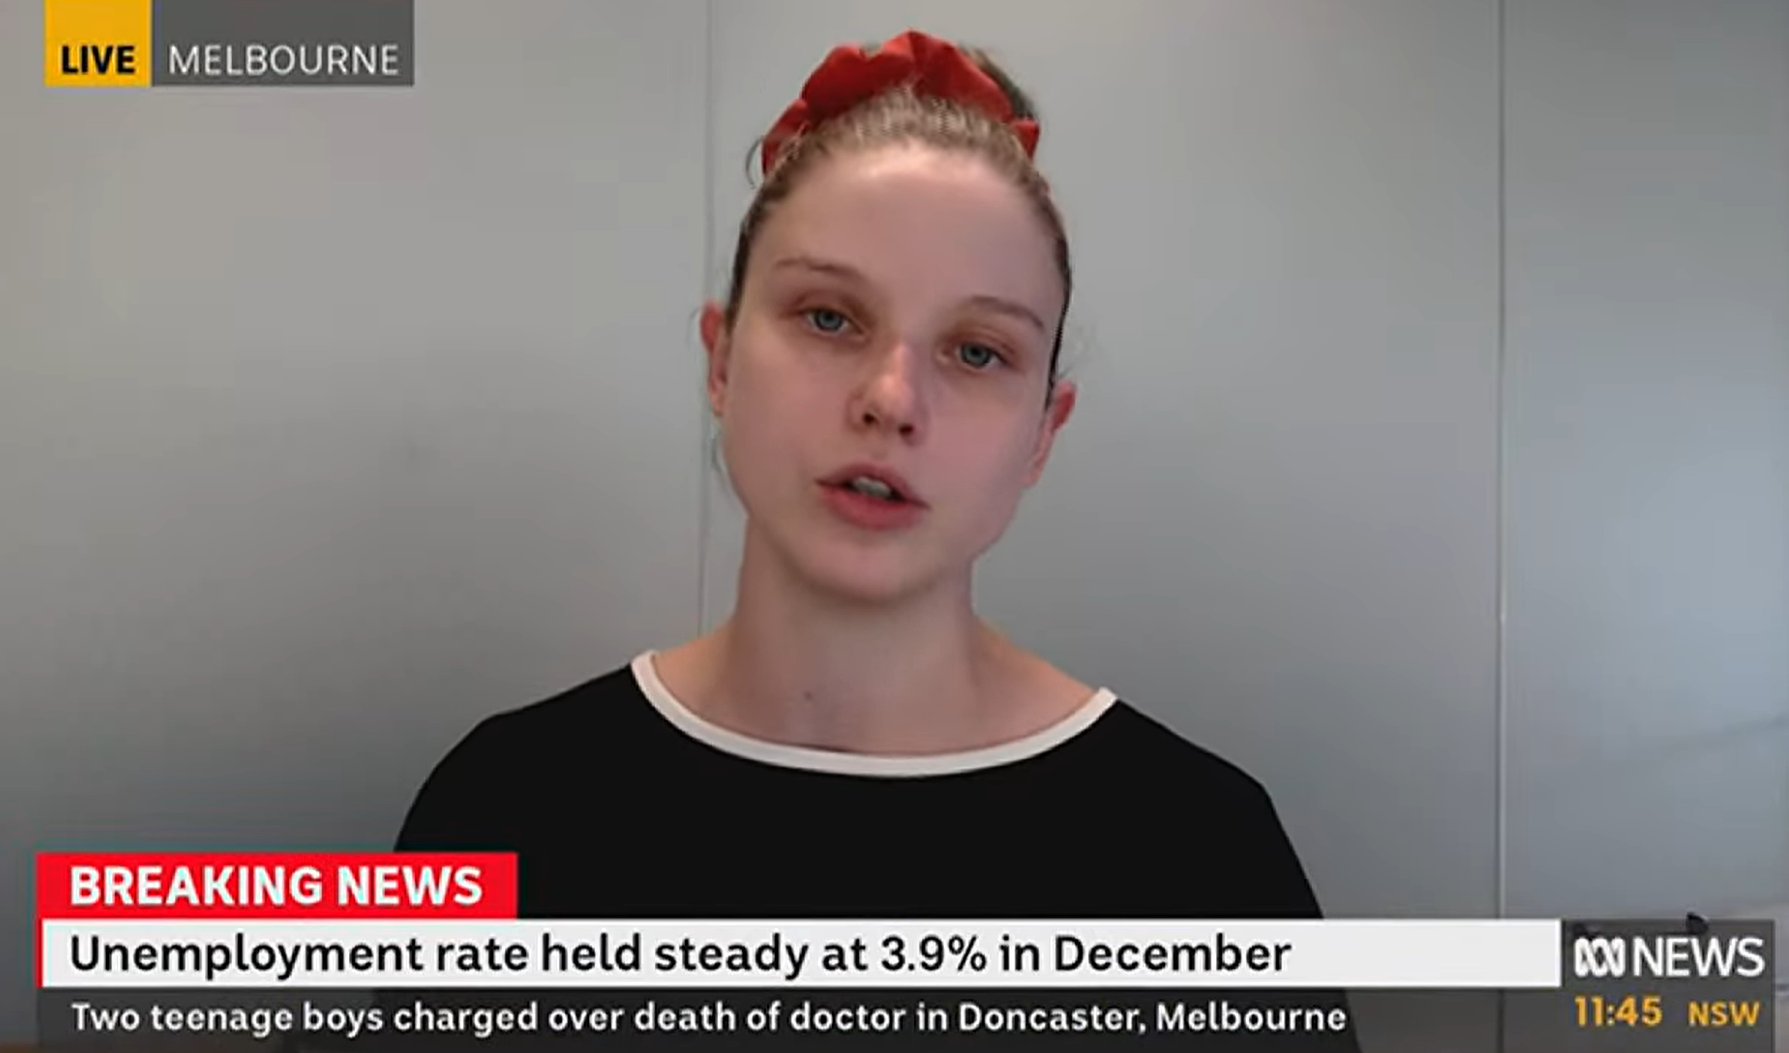 A woman with her hair in a bun secured with a red scrunchie, wearing a black shirt with a thin white collar sits in front of a blank white wall talking. There is a news strap on the bottom of the screen highlighting the unemployment rate is steady at 3.9%, and shows the woman is speaking live in Melbourne.